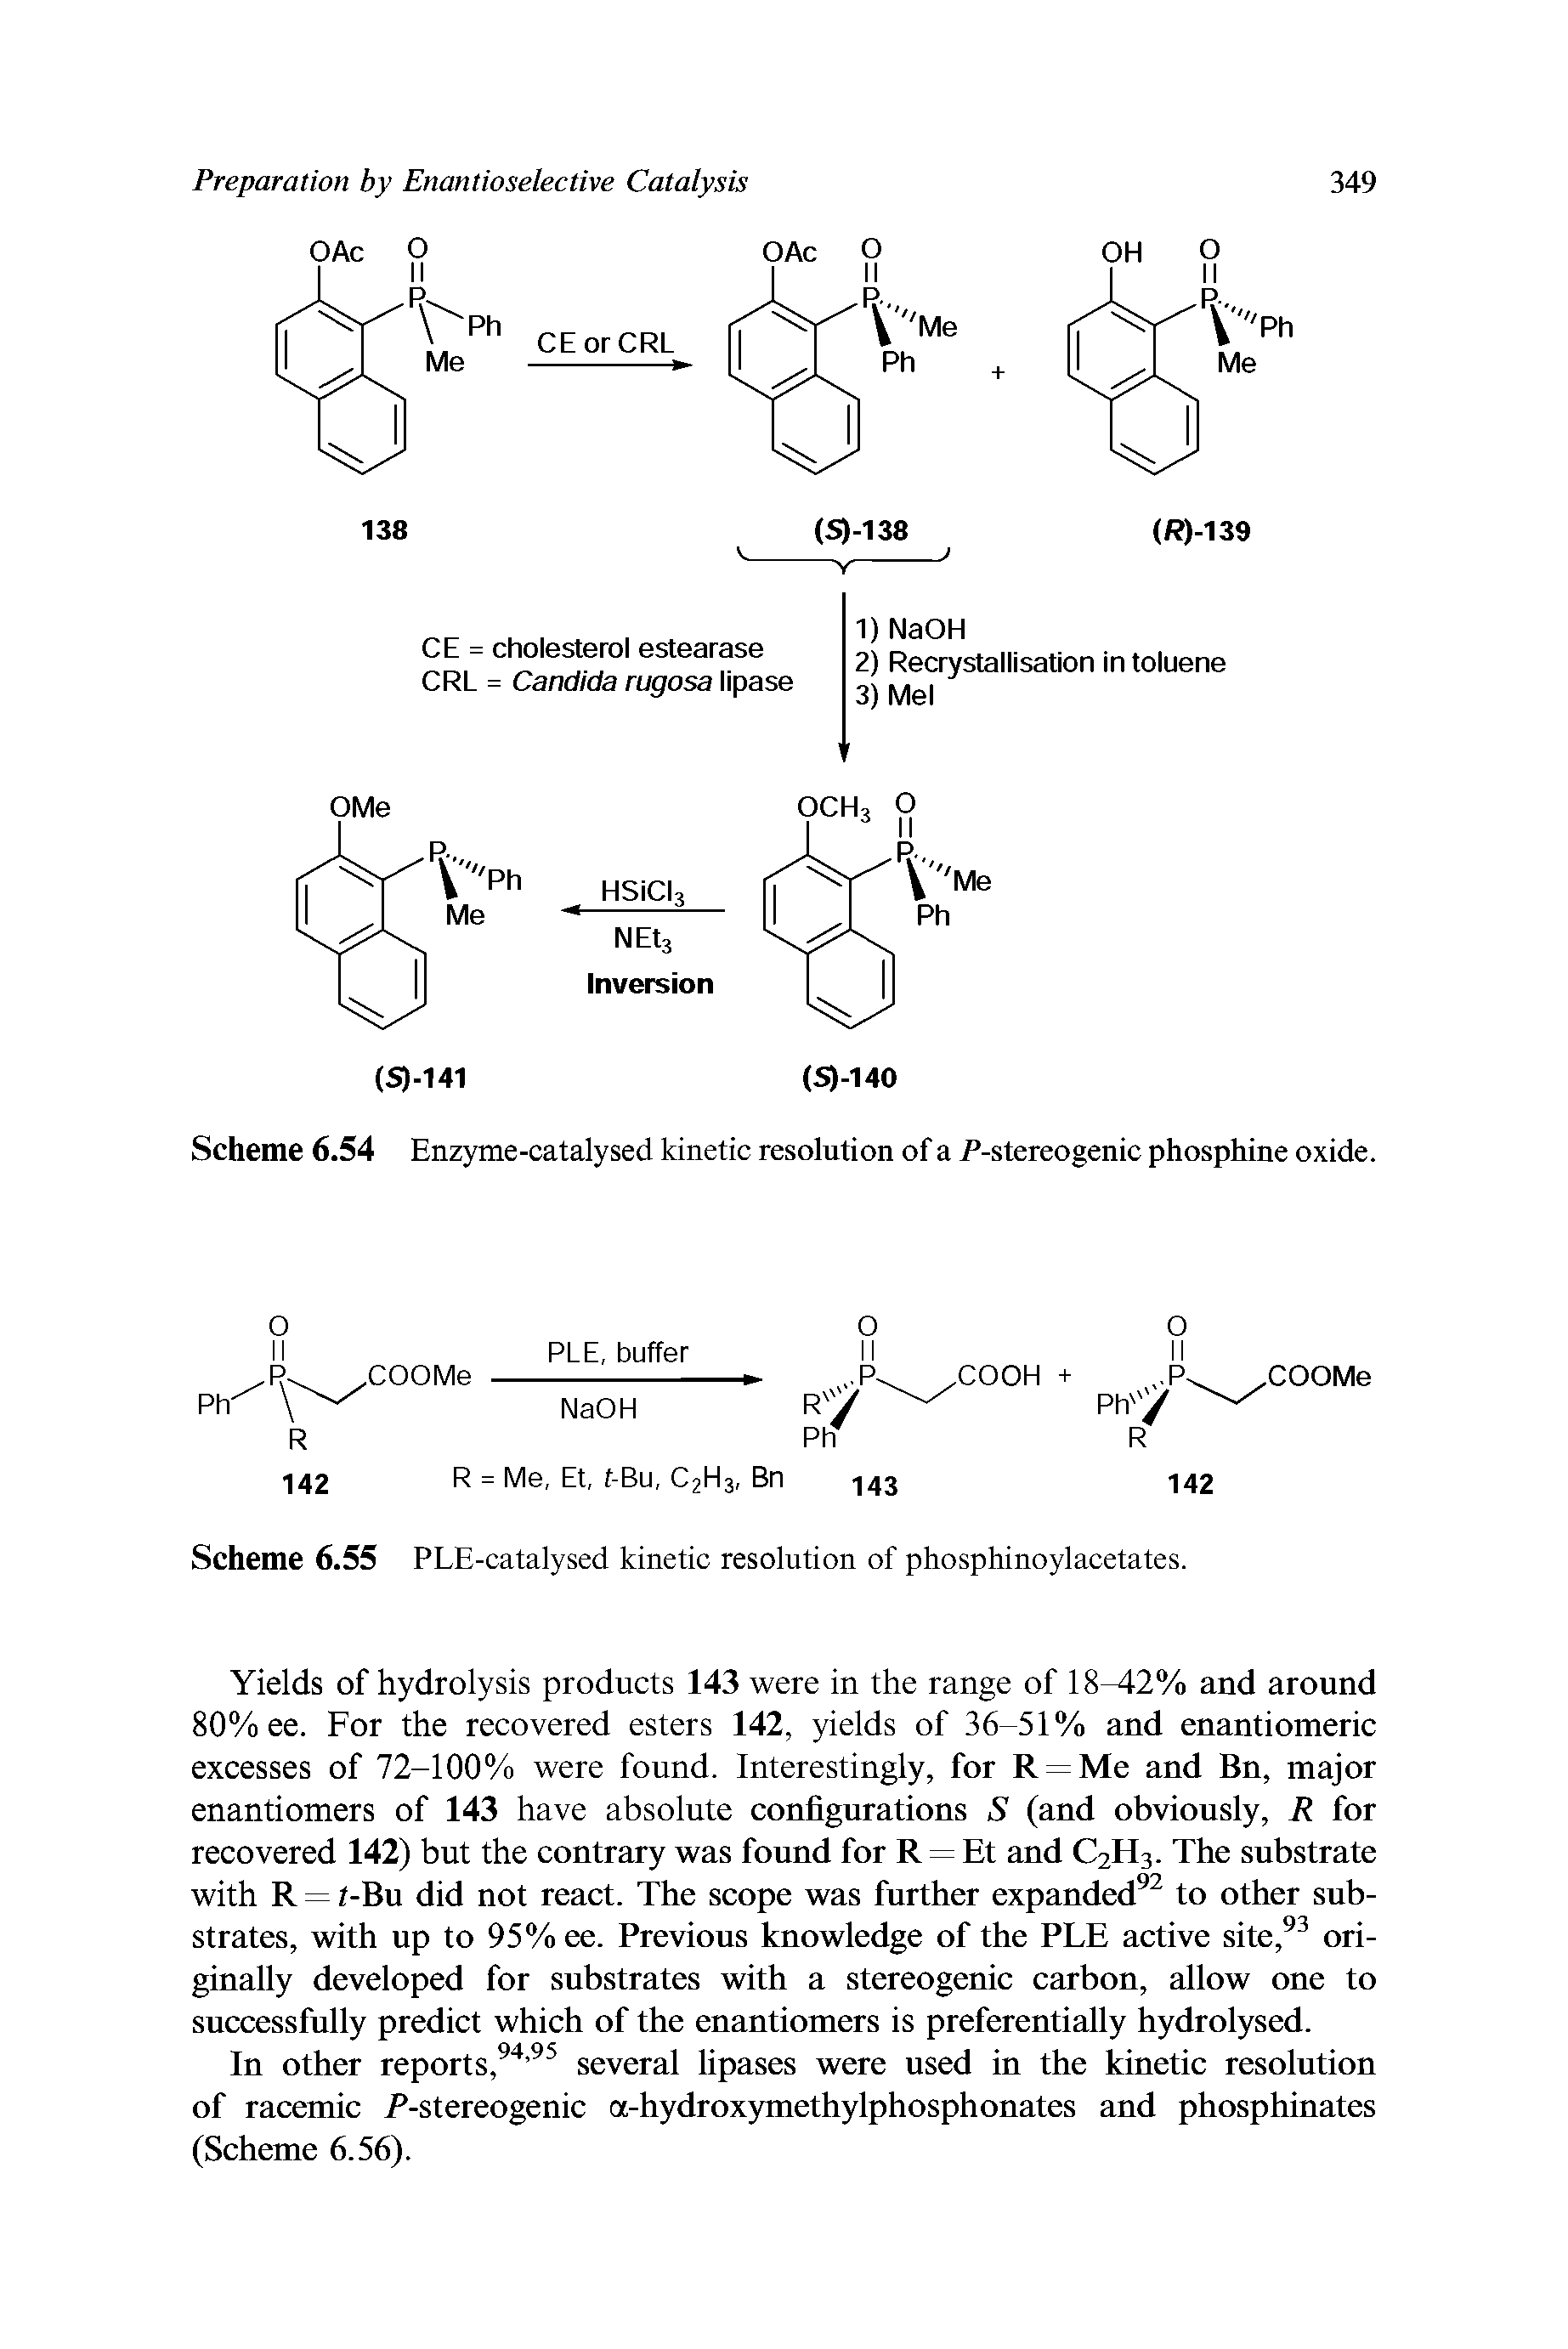 Scheme 6.54 Enzyme-catalysed kinetic resolution of a P-stereogenic phosphine oxide.